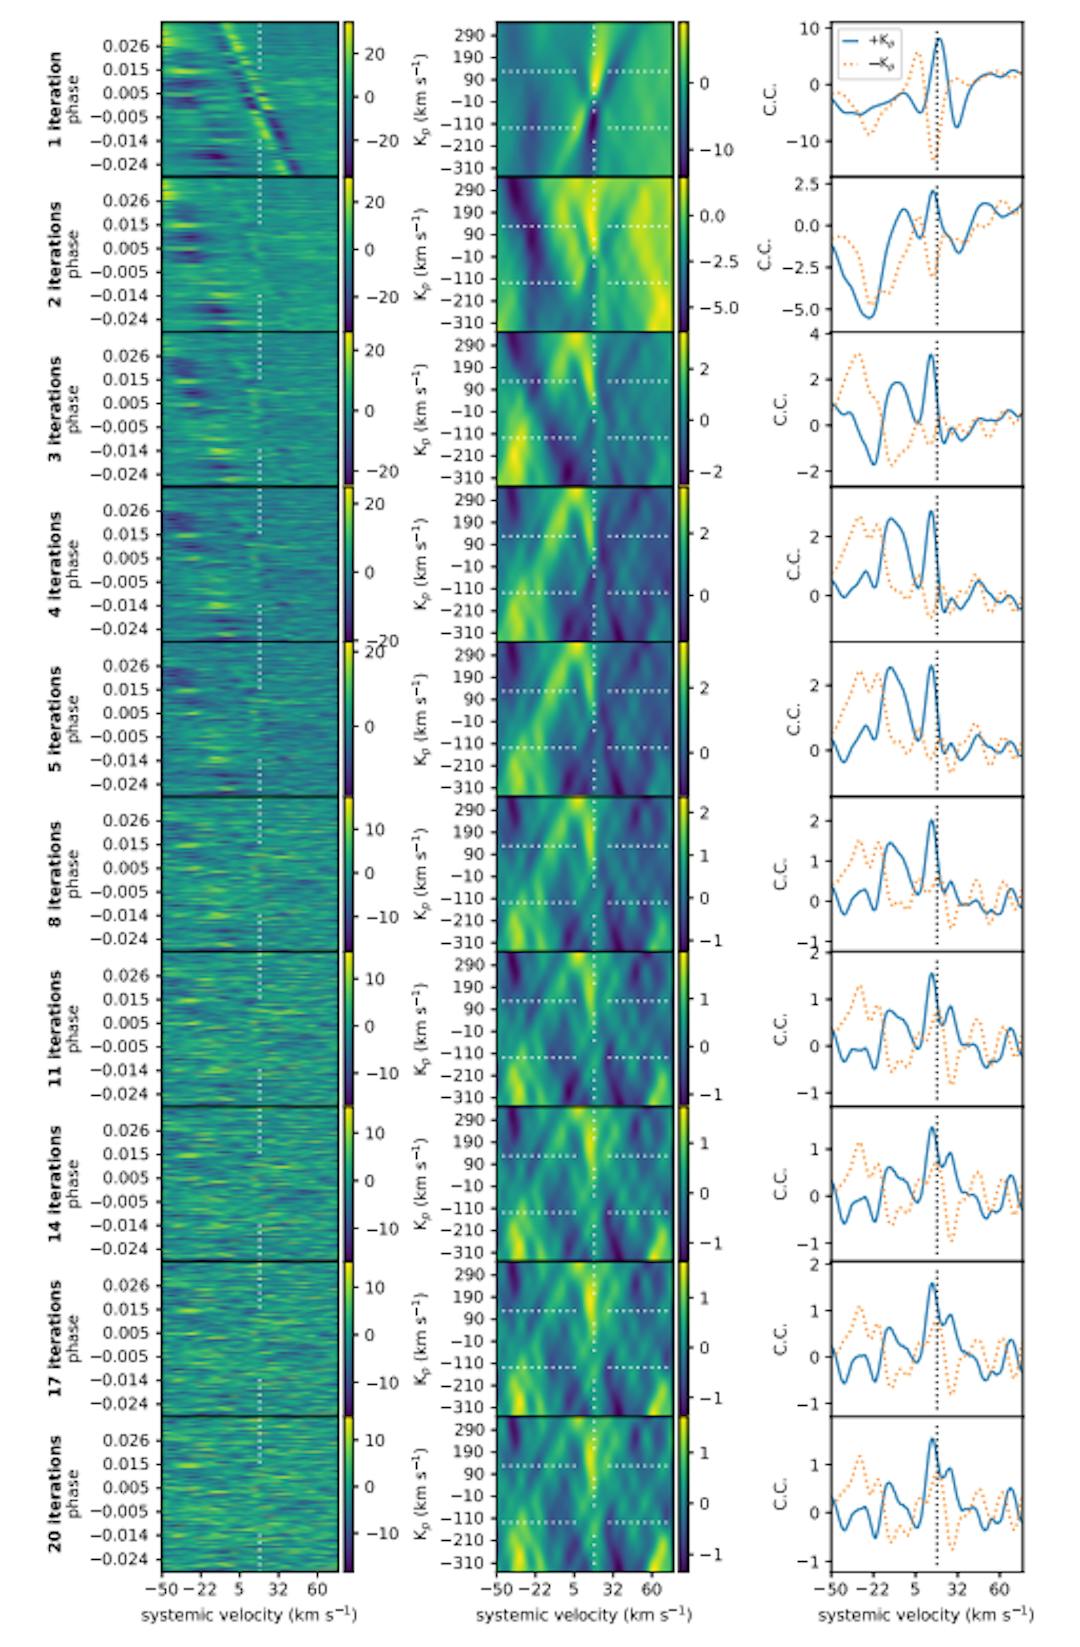 Figure 9. The results of cross-correlating a model transmission spectrum containing spectral lines only from H2O with the IGRINS data after a variable number of SYSREM iterations were applied. The rows show the result of applying 1, 2, 3, 4, 5, 8, 11, 14, 17, and 20 iterations, respectively. The first column shows the cross-correlation for each frame in the planet’s rest-frame. The dotted line shows the expected trace of the planet’s signal at the system’s systemic velocity. The second column shows the phase-folded cross-correlation signal as a function of phase. The dotted horizontal and vertical lines show the planet’s expected position in ±KP and systemic velocity, respectively. The thrid column shows the 1D cross-correlation as a function of systemic velocity at ±KP. The black dotted line indicates the system’s systemic velocity.